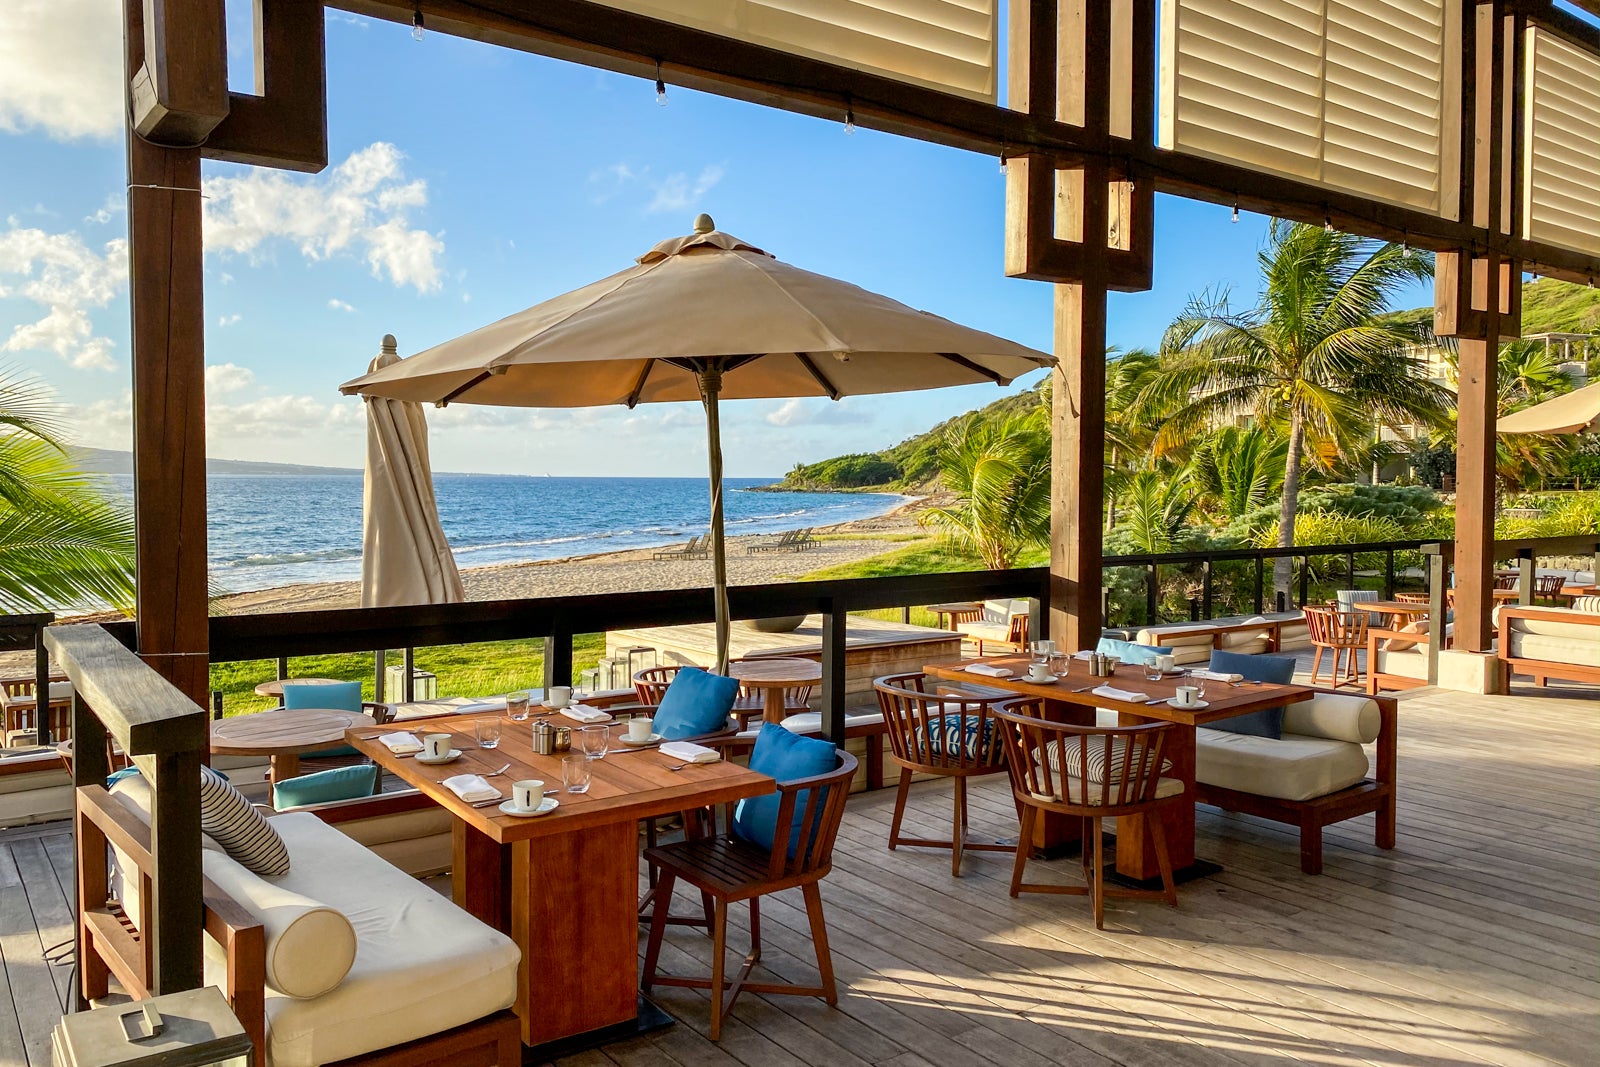 Park Hyatt St. Kitts outdoor dining with views to the ocean